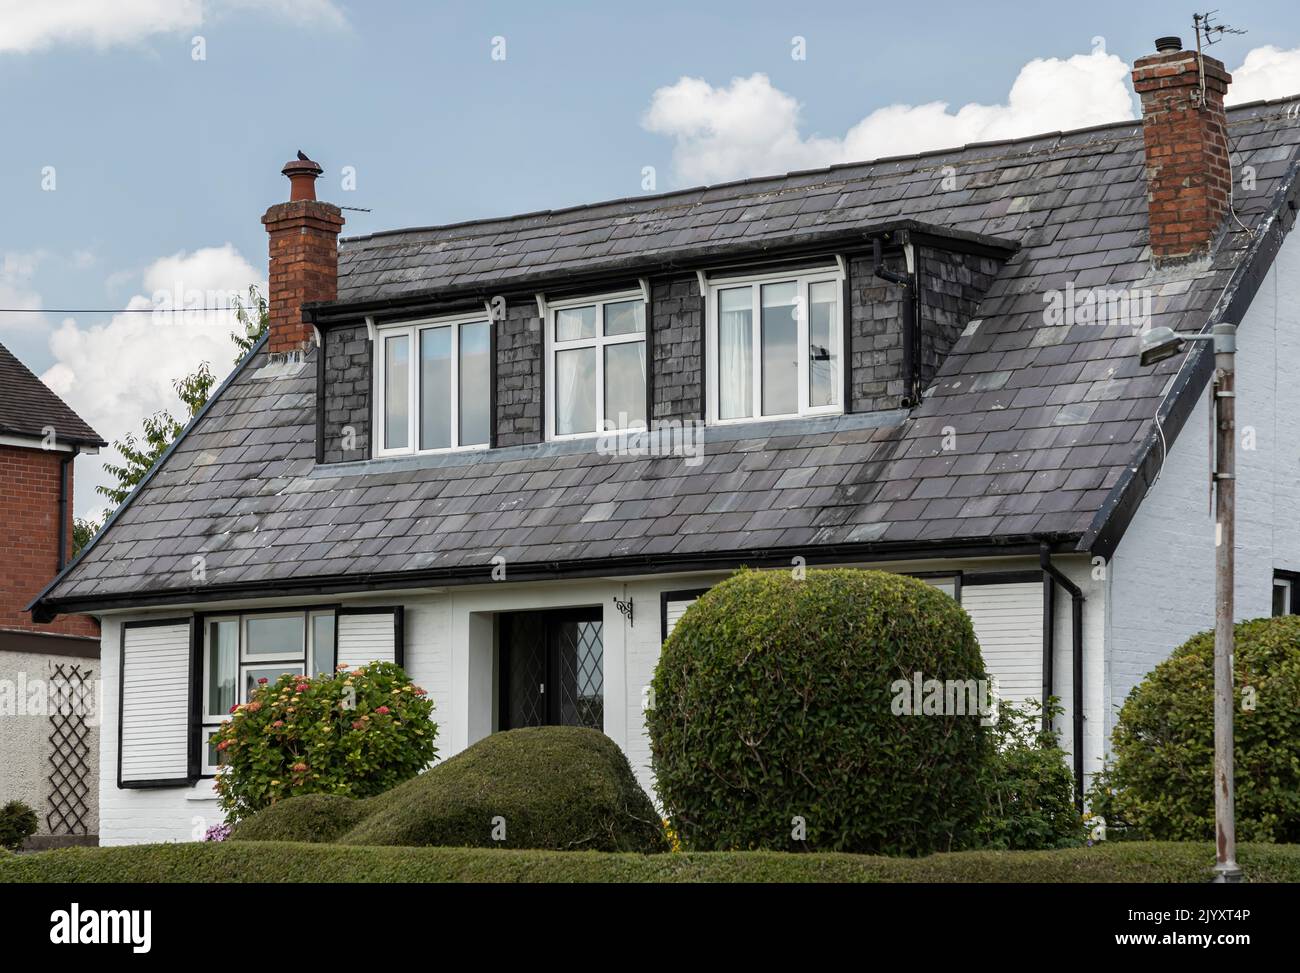 Darnhall, Cheshire, UK - June 23rd, 2022 - Bungalow with slate roof and dormer windows against a blue sky with small shrubs in the garden Stock Photo